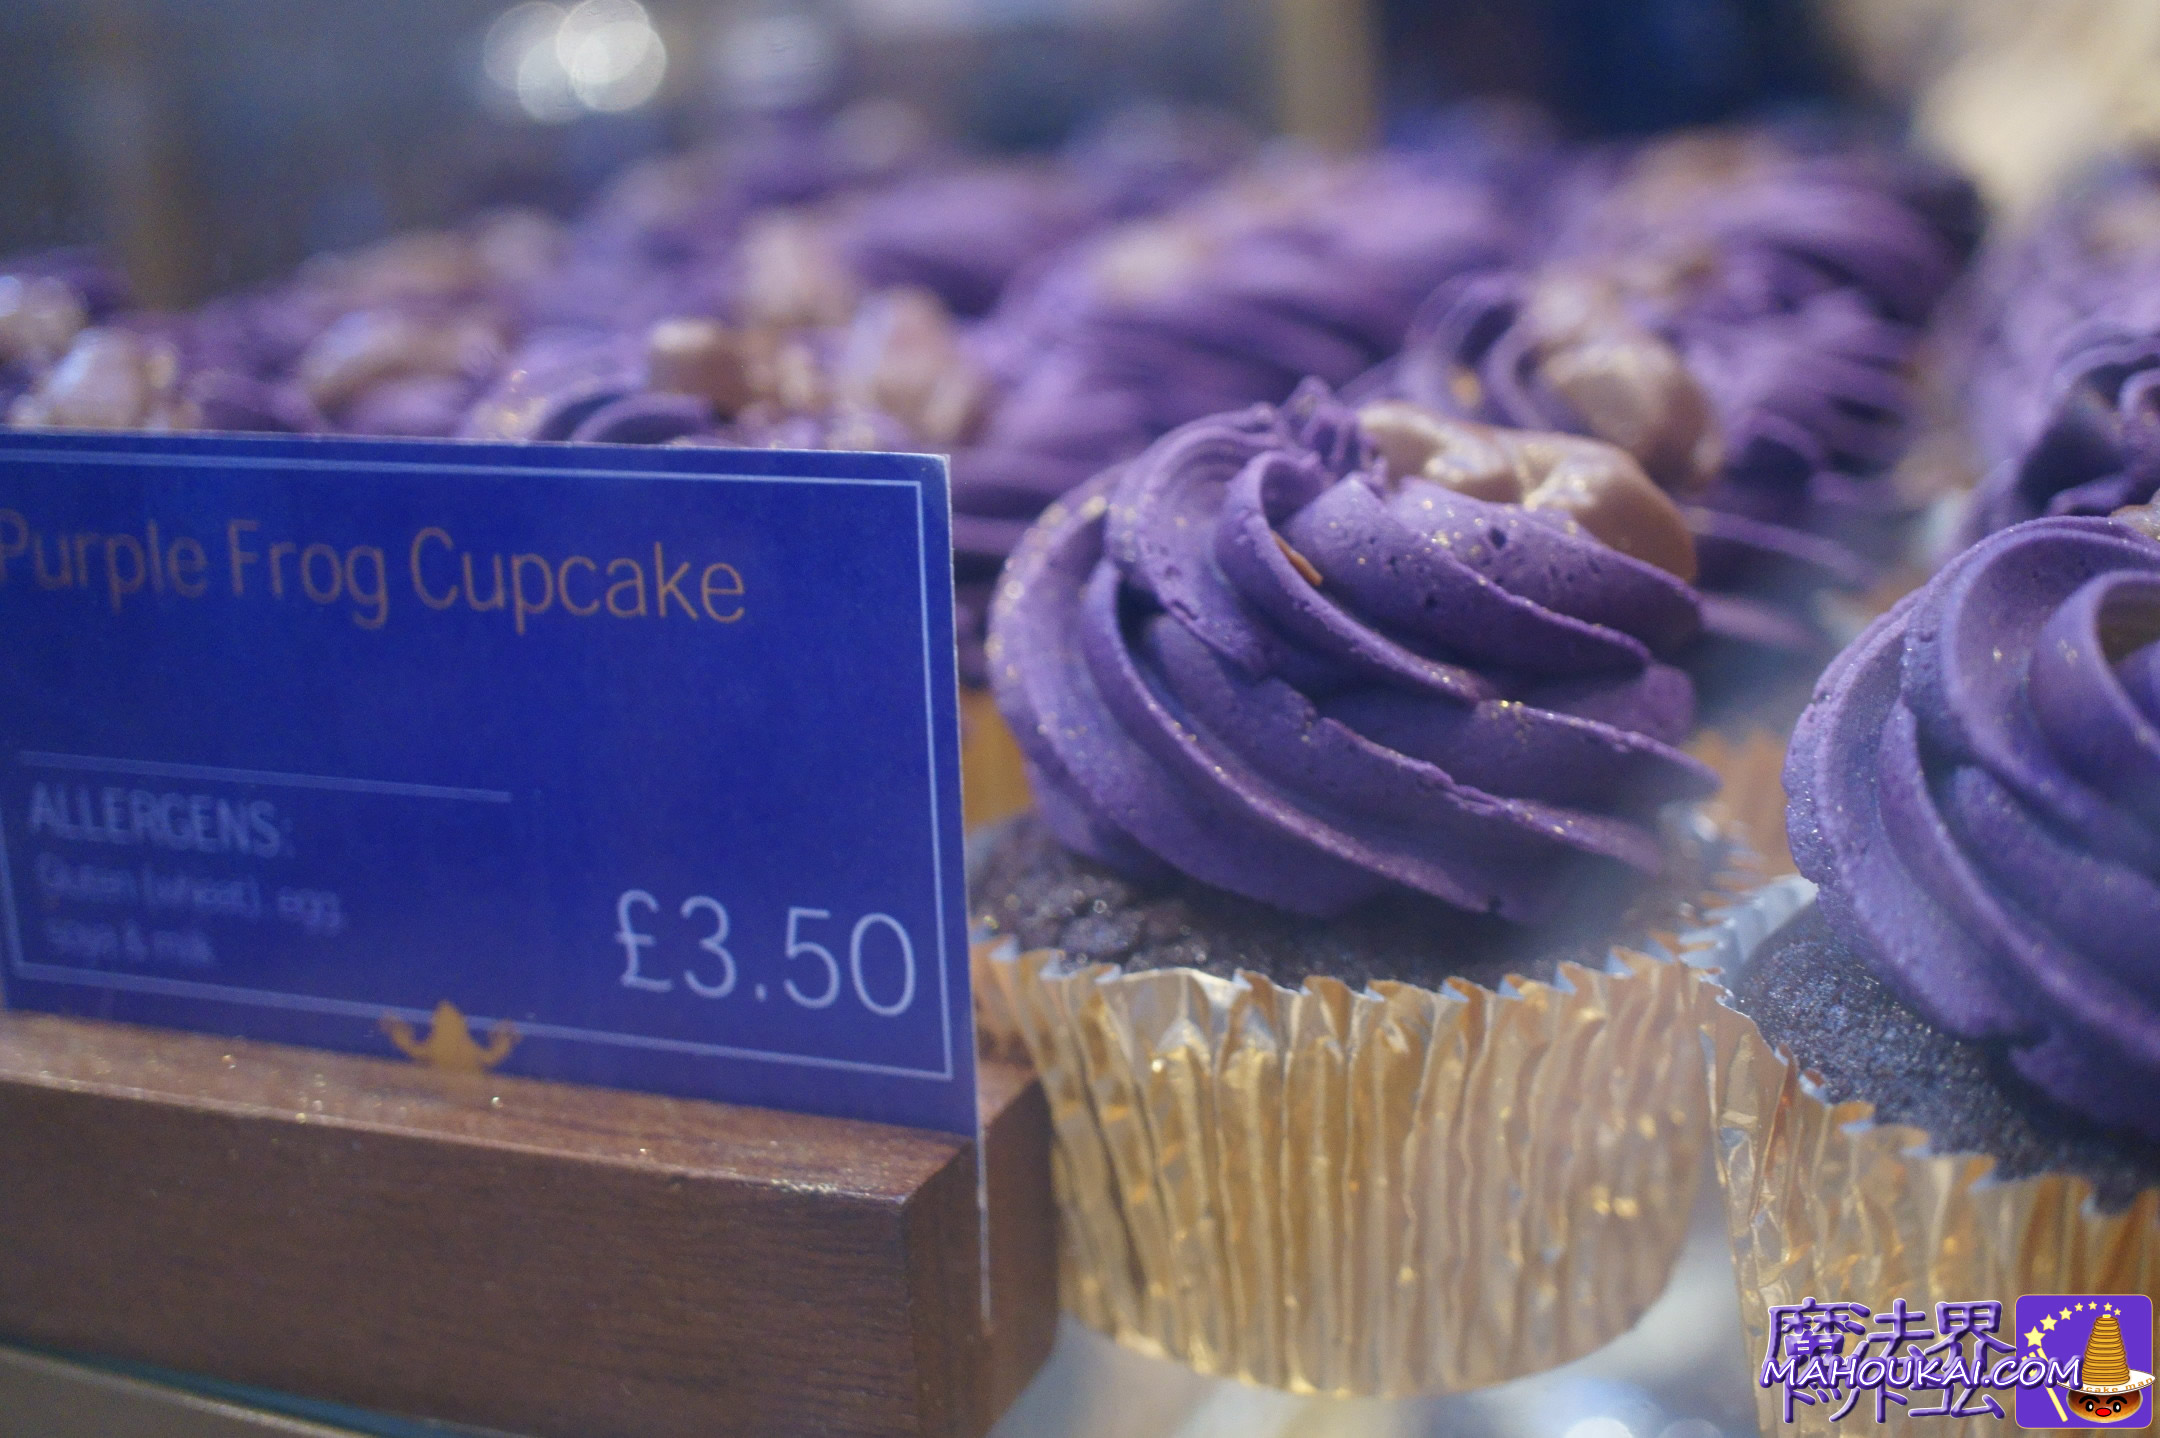 Purple Frog Cupcake £3.50 THE CHOCOLATE FROG CAFE Frog Chocolate Cafe Harry Potter Studio Tour London